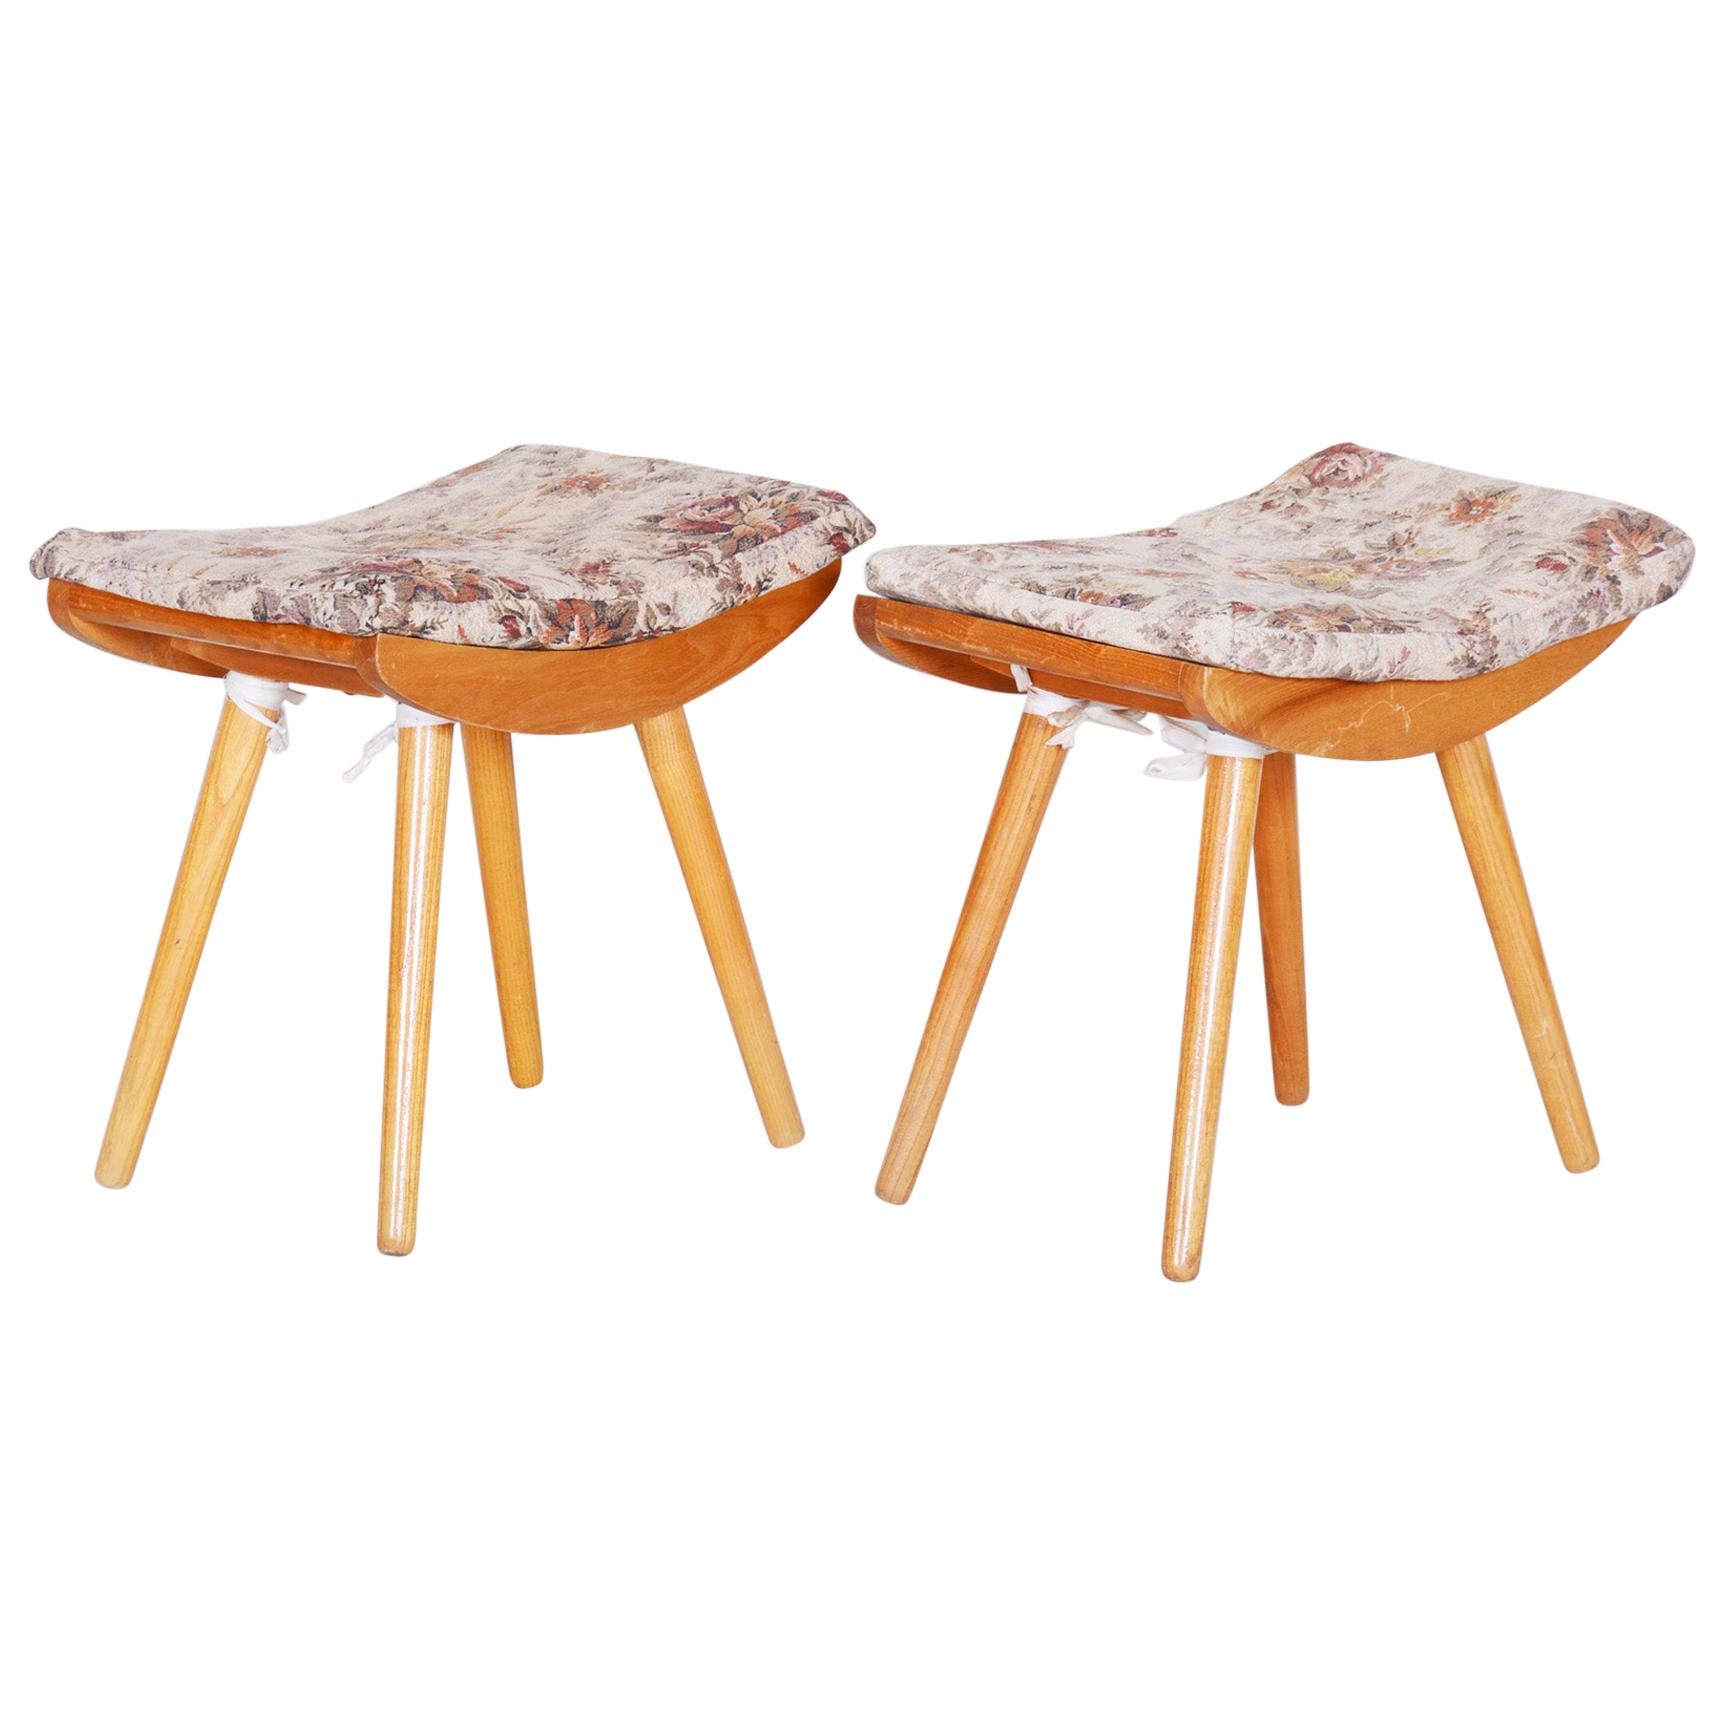 Pair of Midcentury Ash Stools, 1960s, Original Preserved Condition For Sale